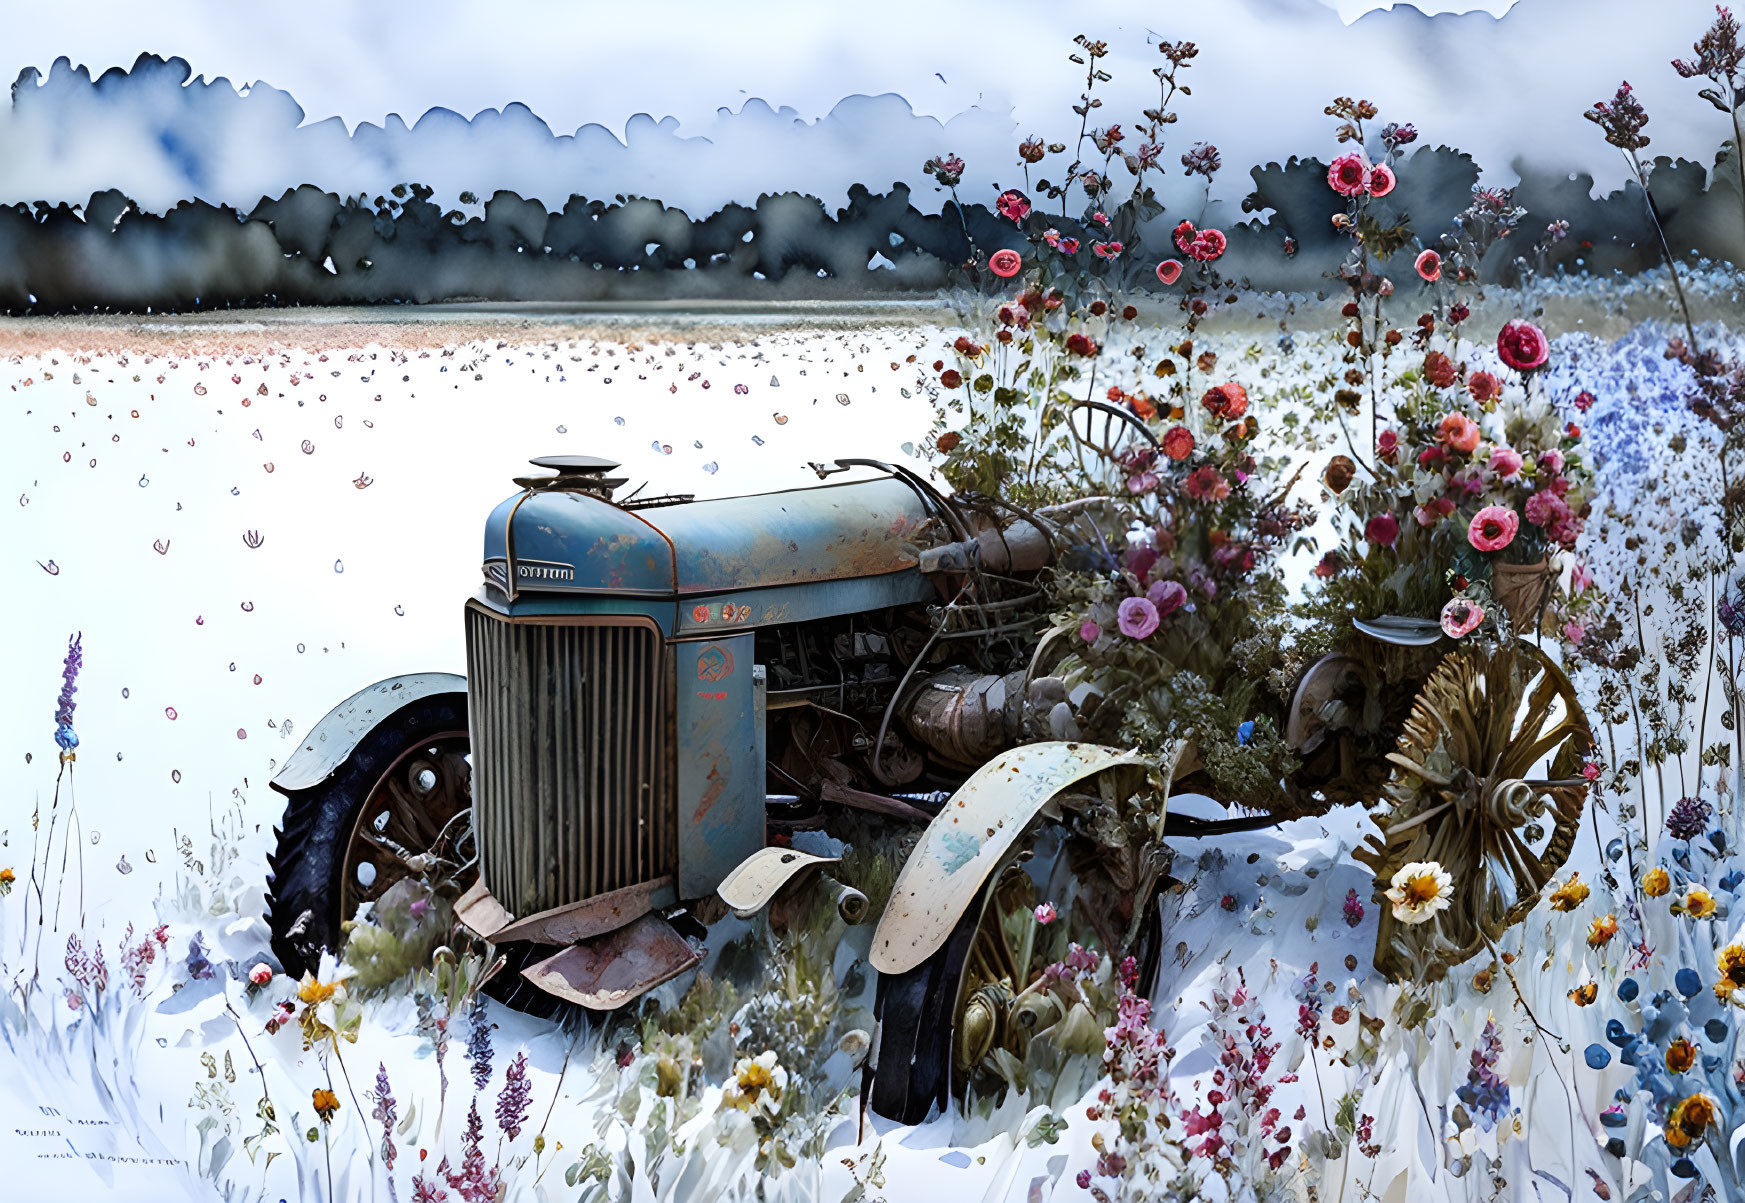 Rusty tractor in snow-covered field with wildflowers and cloudy skies